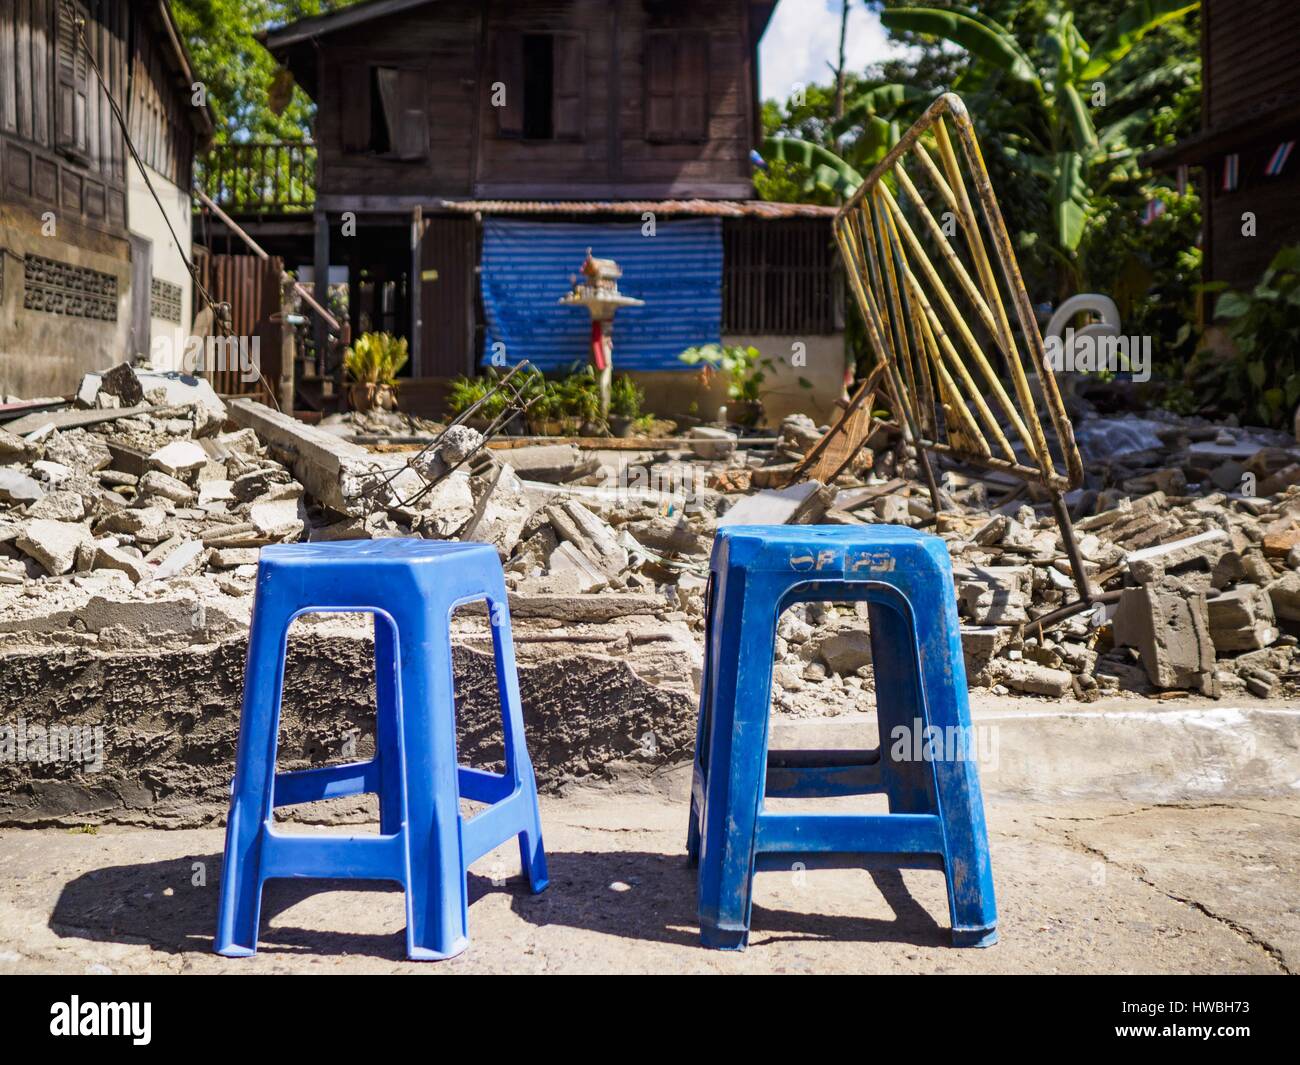 Bangkok, Bangkok, Thailand. 20th Mar, 2017. Plastic stools in front of an empty lot that used to be a home in Pom Mahakan. As families are evicted the government immediately tears down the home so squatters don't move into it. The final evictions of the remaining families in Pom Mahakan, a slum community in a 19th century fort in Bangkok, have started. City officials are moving the residents out of the fort. NGOs and historic preservation organizations protested the city's action but city officials did not relent and started evicting the remaining families in early March. (Credit Image: © Ja Stock Photo